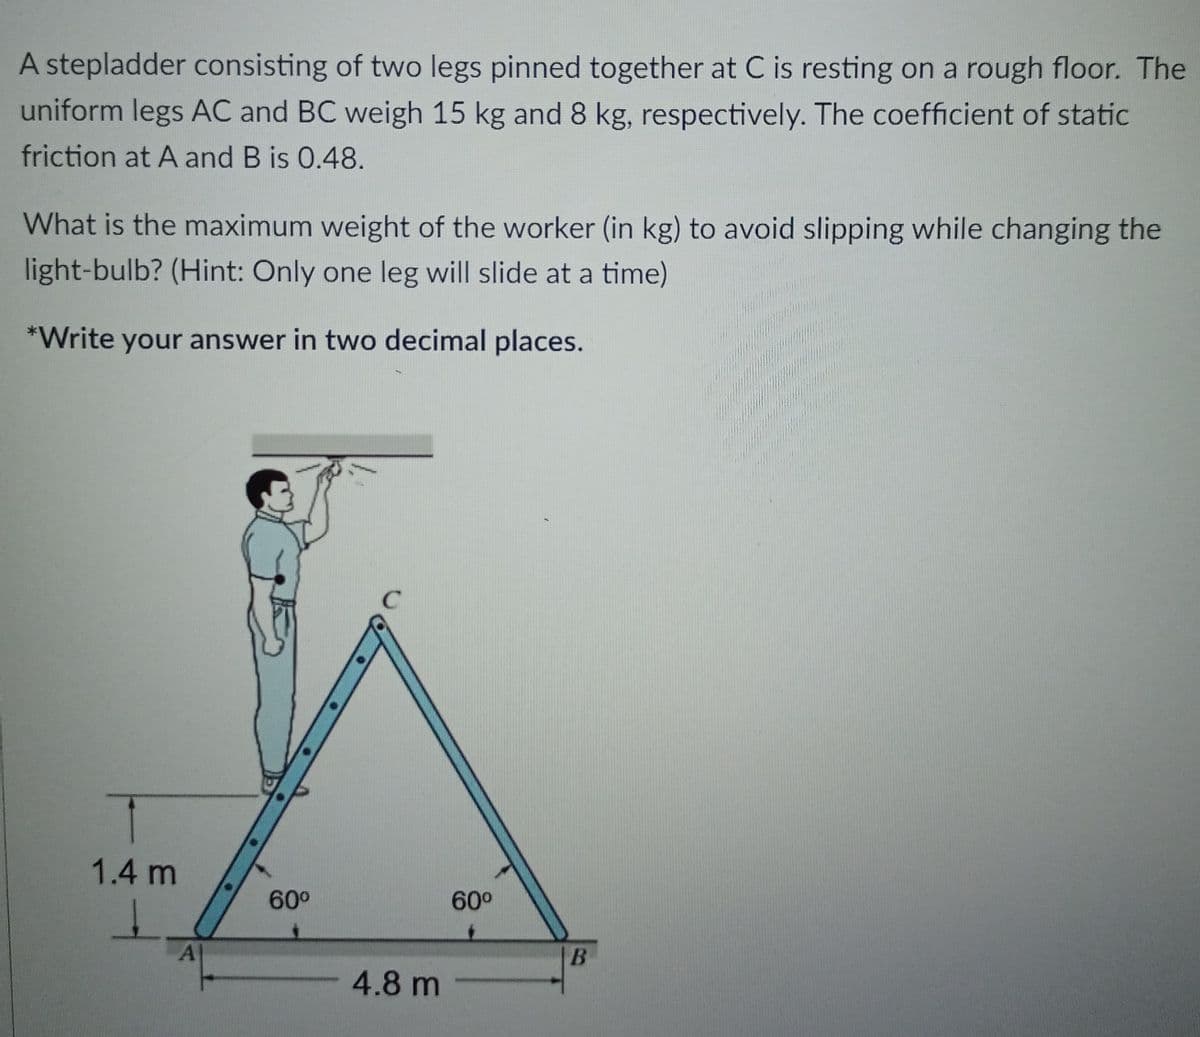 A stepladder consisting of two legs pinned together at C is resting on a rough floor. The
uniform legs AC and BC weigh 15 kg and 8 kg, respectively. The coefficient of static
friction at A and B is 0.48.
What is the maximum weight of the worker (in kg) to avoid slipping while changing the
light-bulb? (Hint: Only one leg will slide at a time)
*Write your answer in two decimal places.
1.4 m
60°
60°
A
4.8 m -
